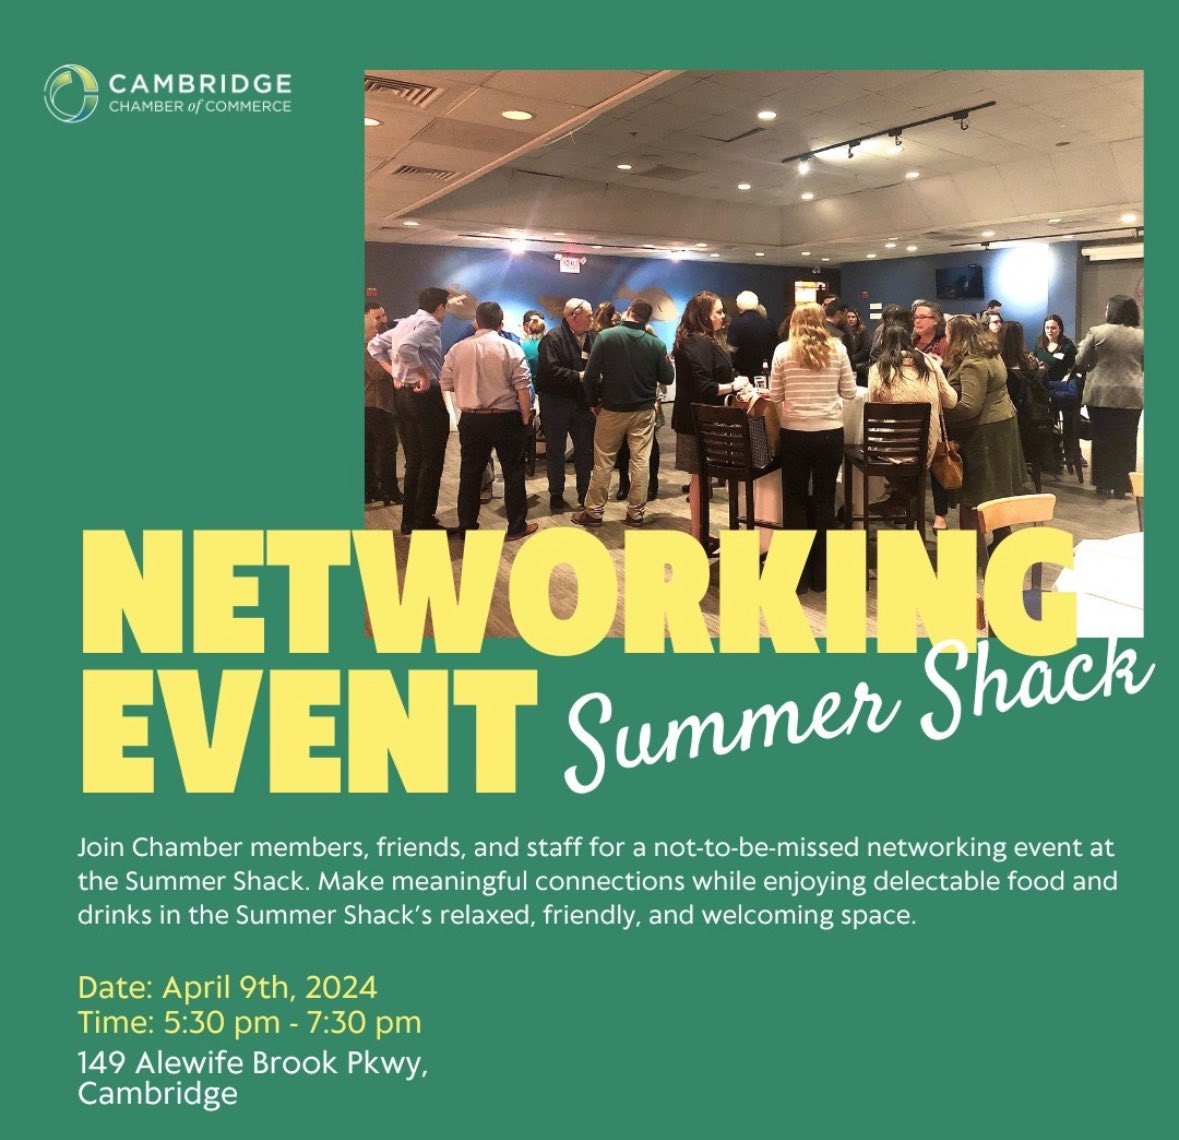 One week until our after work networking event at Summer Shack! Link to register:business.cambridgechamber.org/events/details… #summershack #cambridge #networking